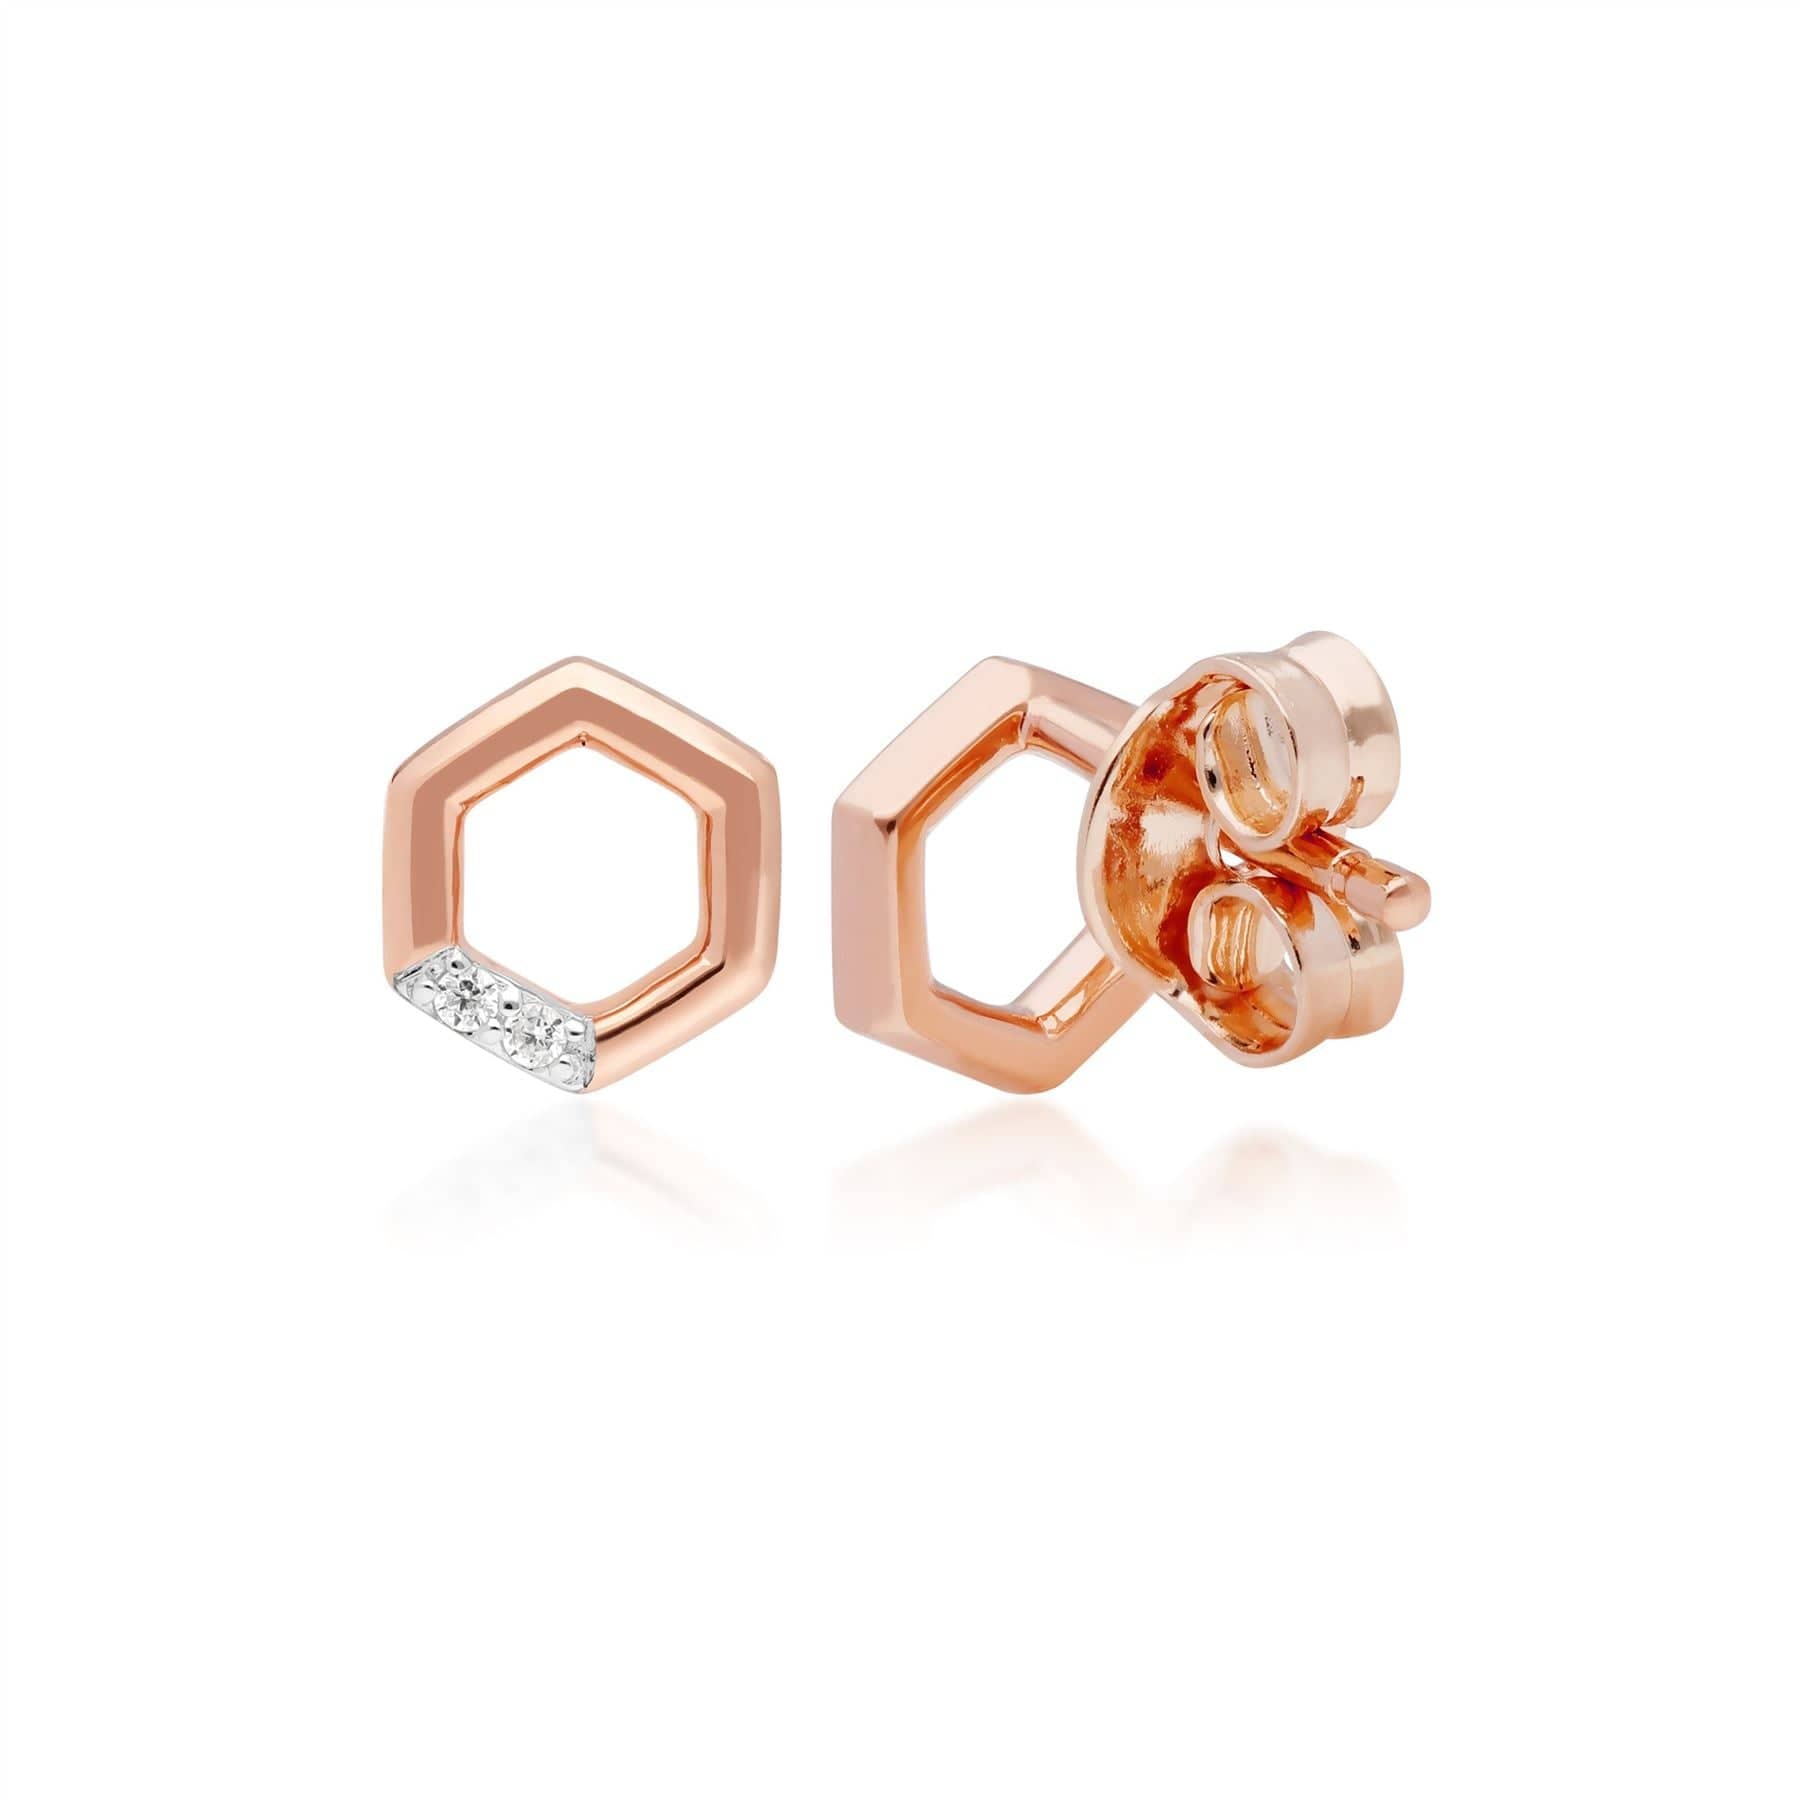 Diamond Pave Hexagon Stud Earrings in 9ct Rose Gold